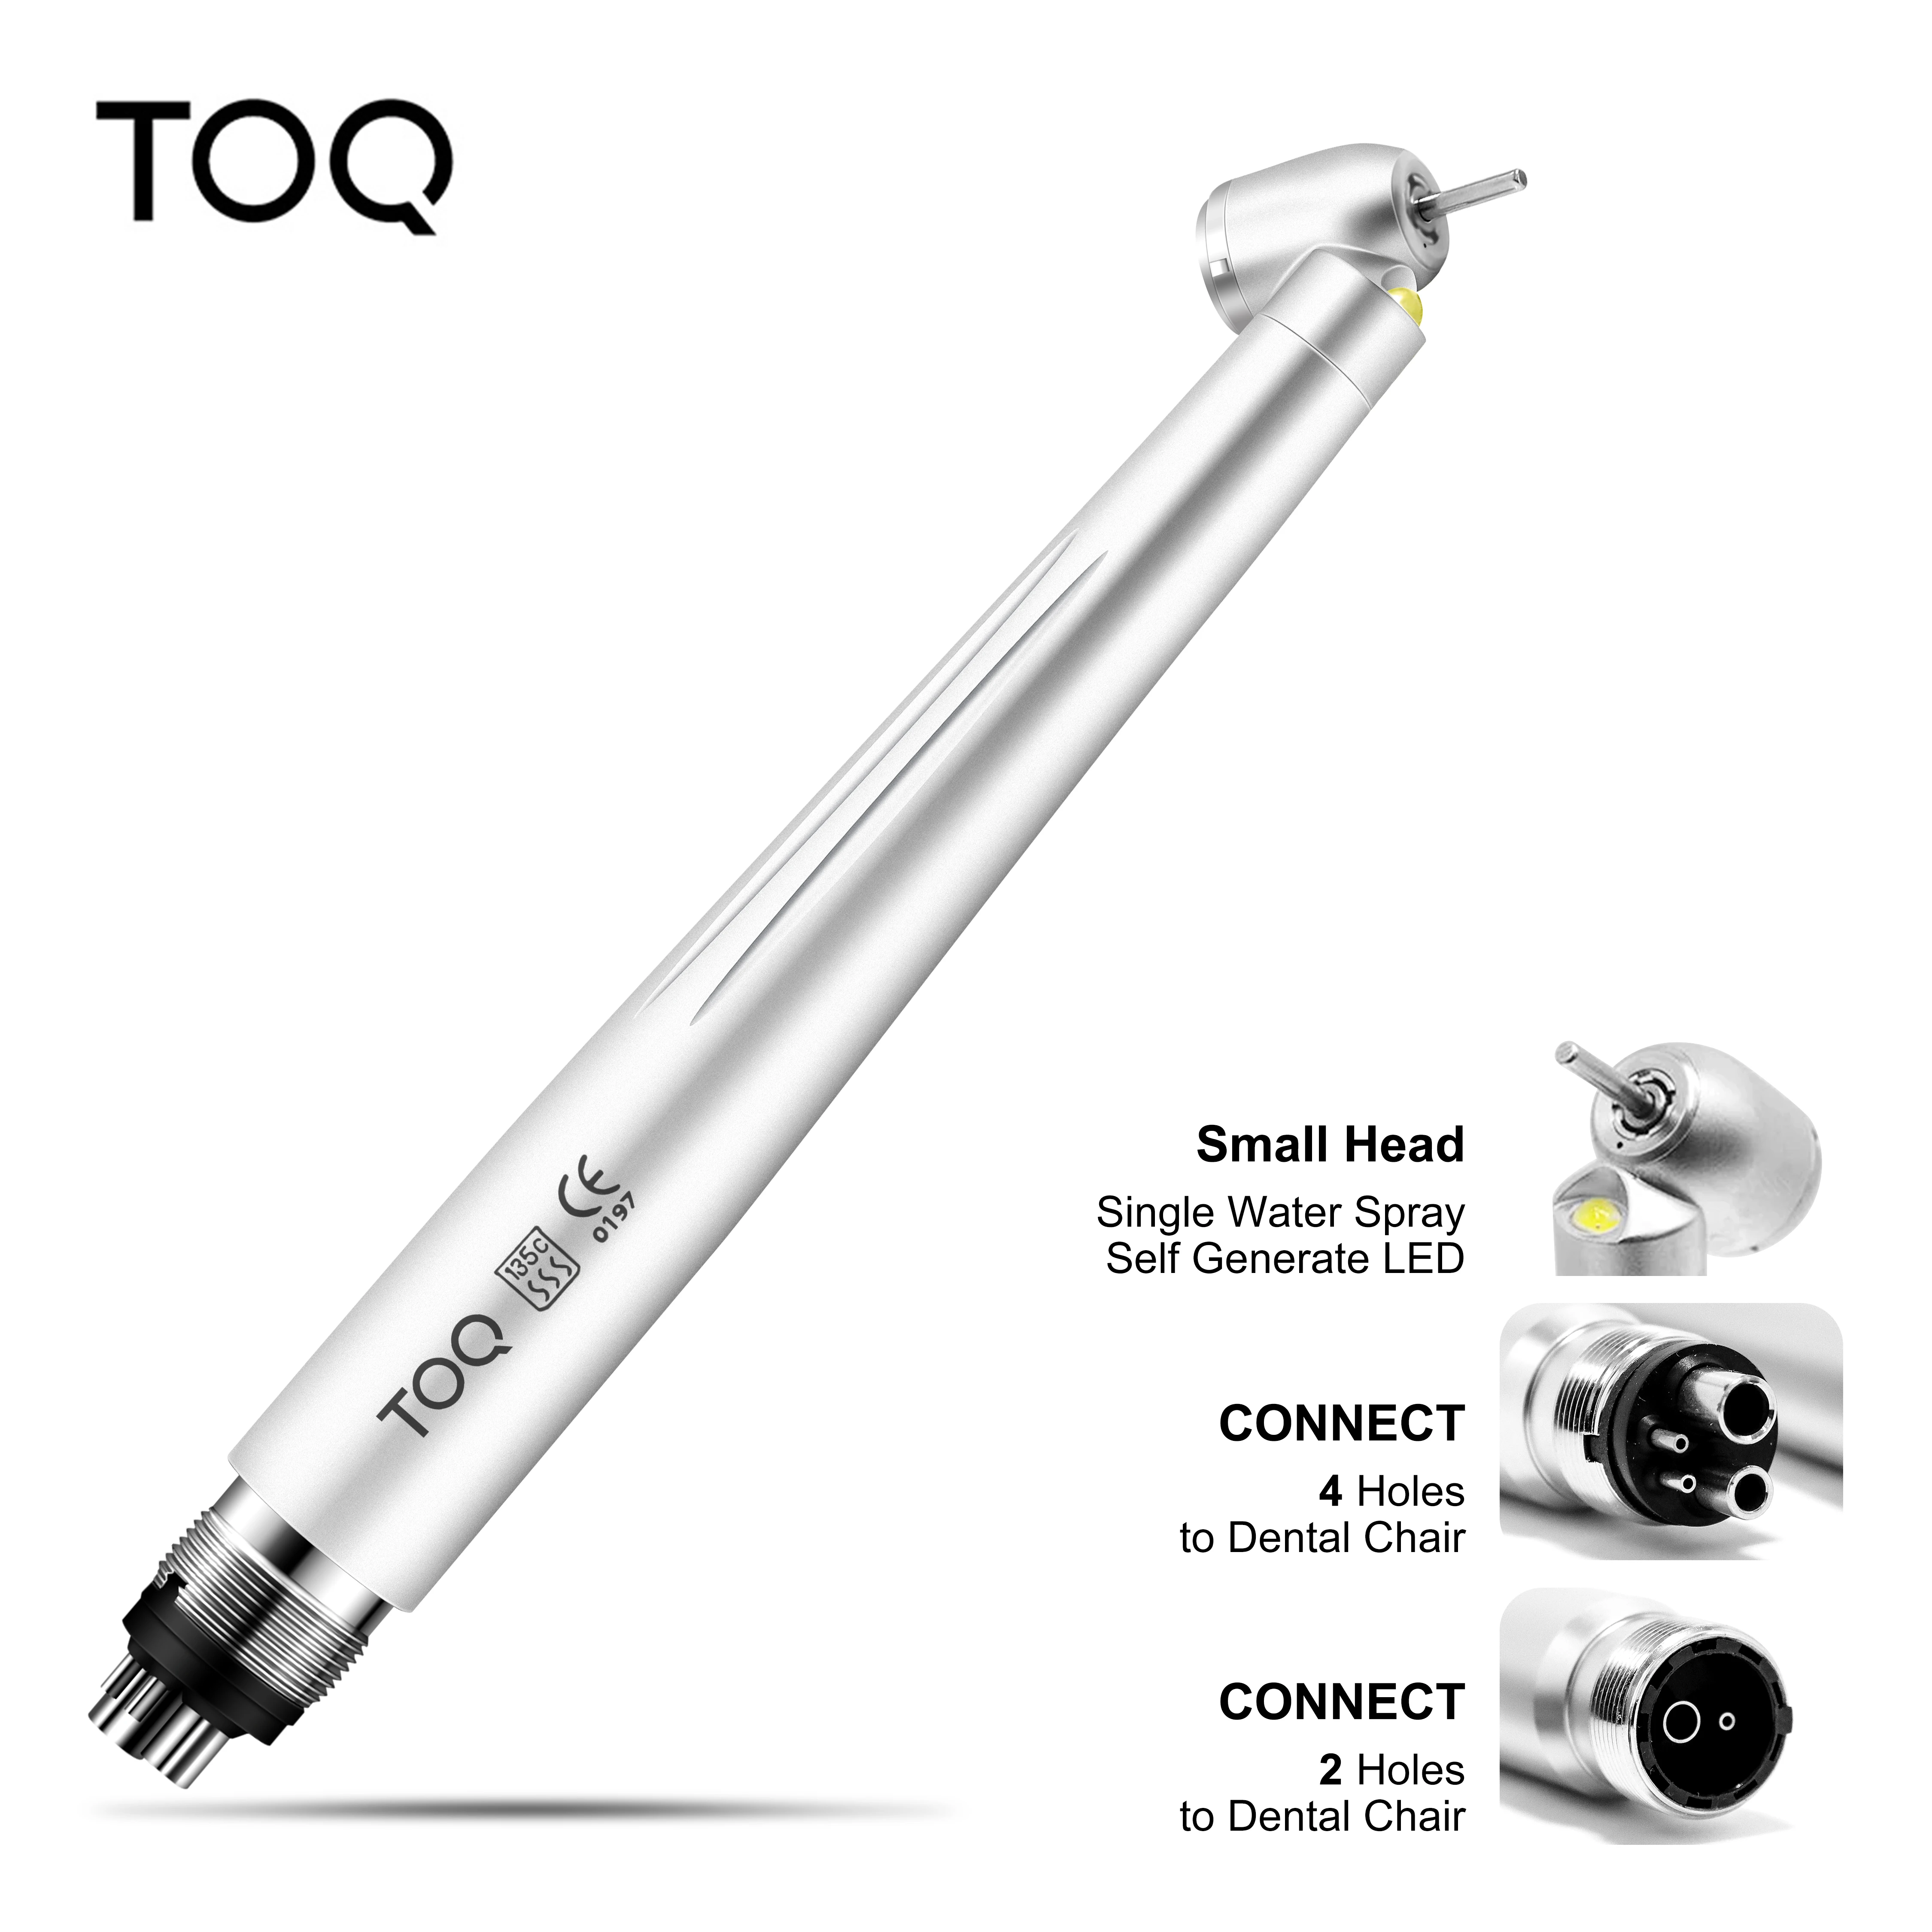 Dental 45 Degree LED High Speed Handpiece E-generator Integrated Small Head Push Button Handpiece Single Water Spray